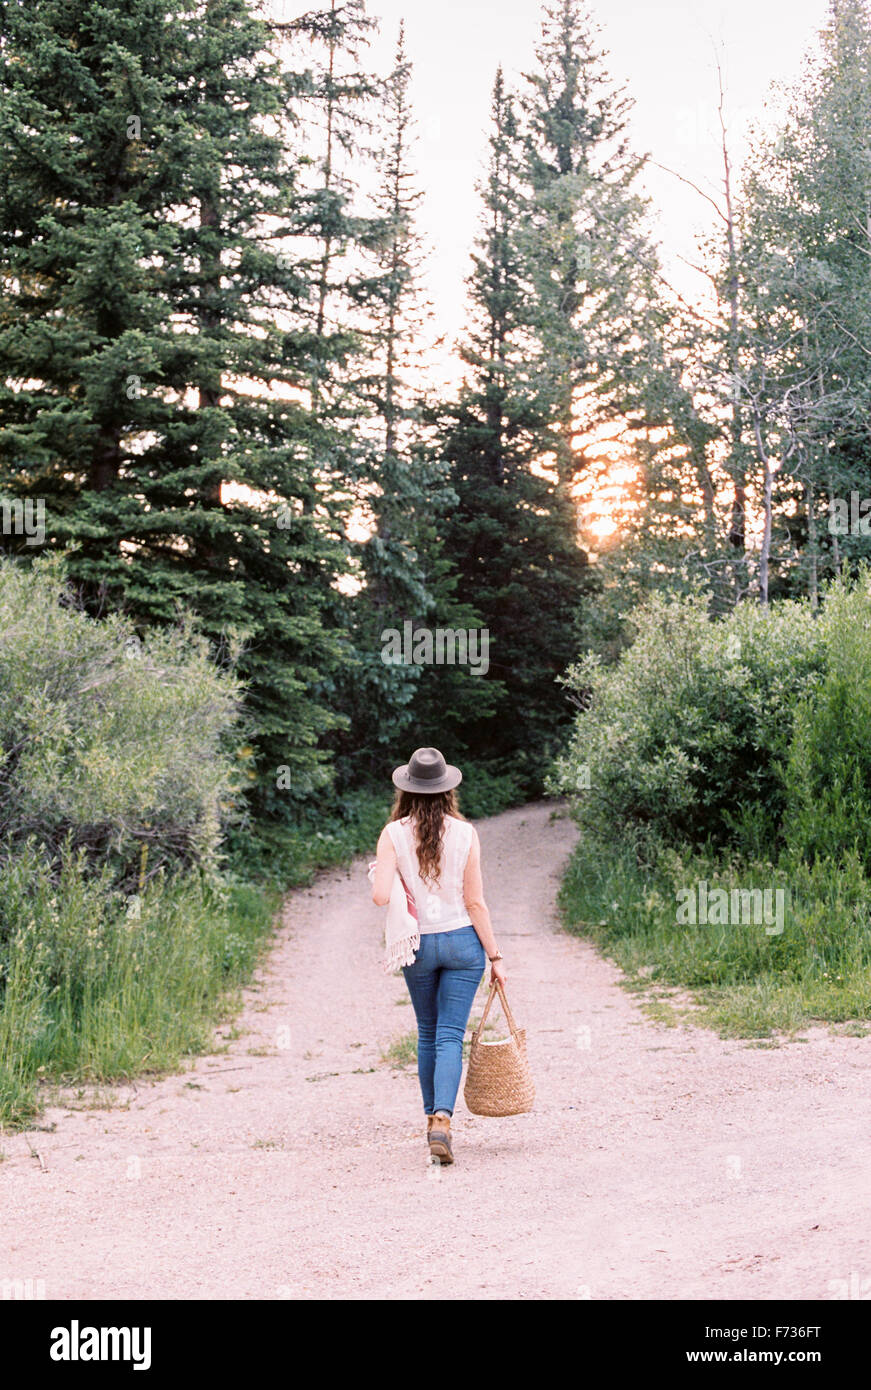 Woman walking along a forest path, carrying a bag. Stock Photo